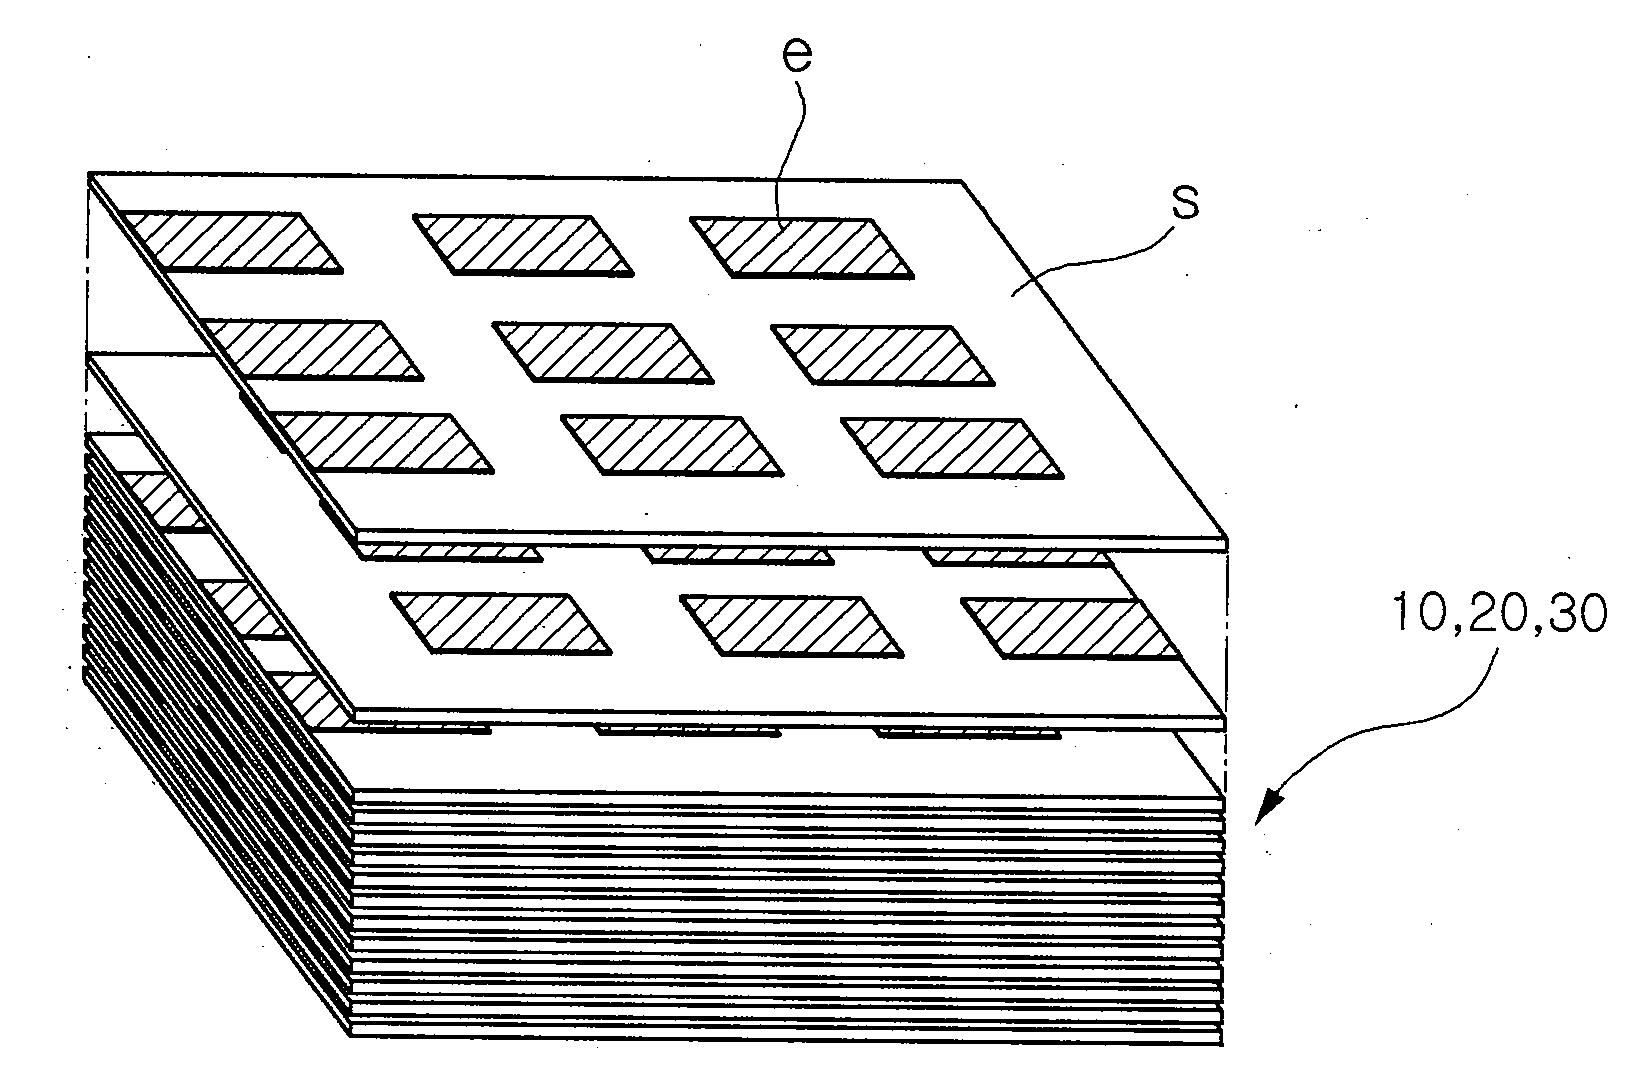 Multilayered ceramic substrate